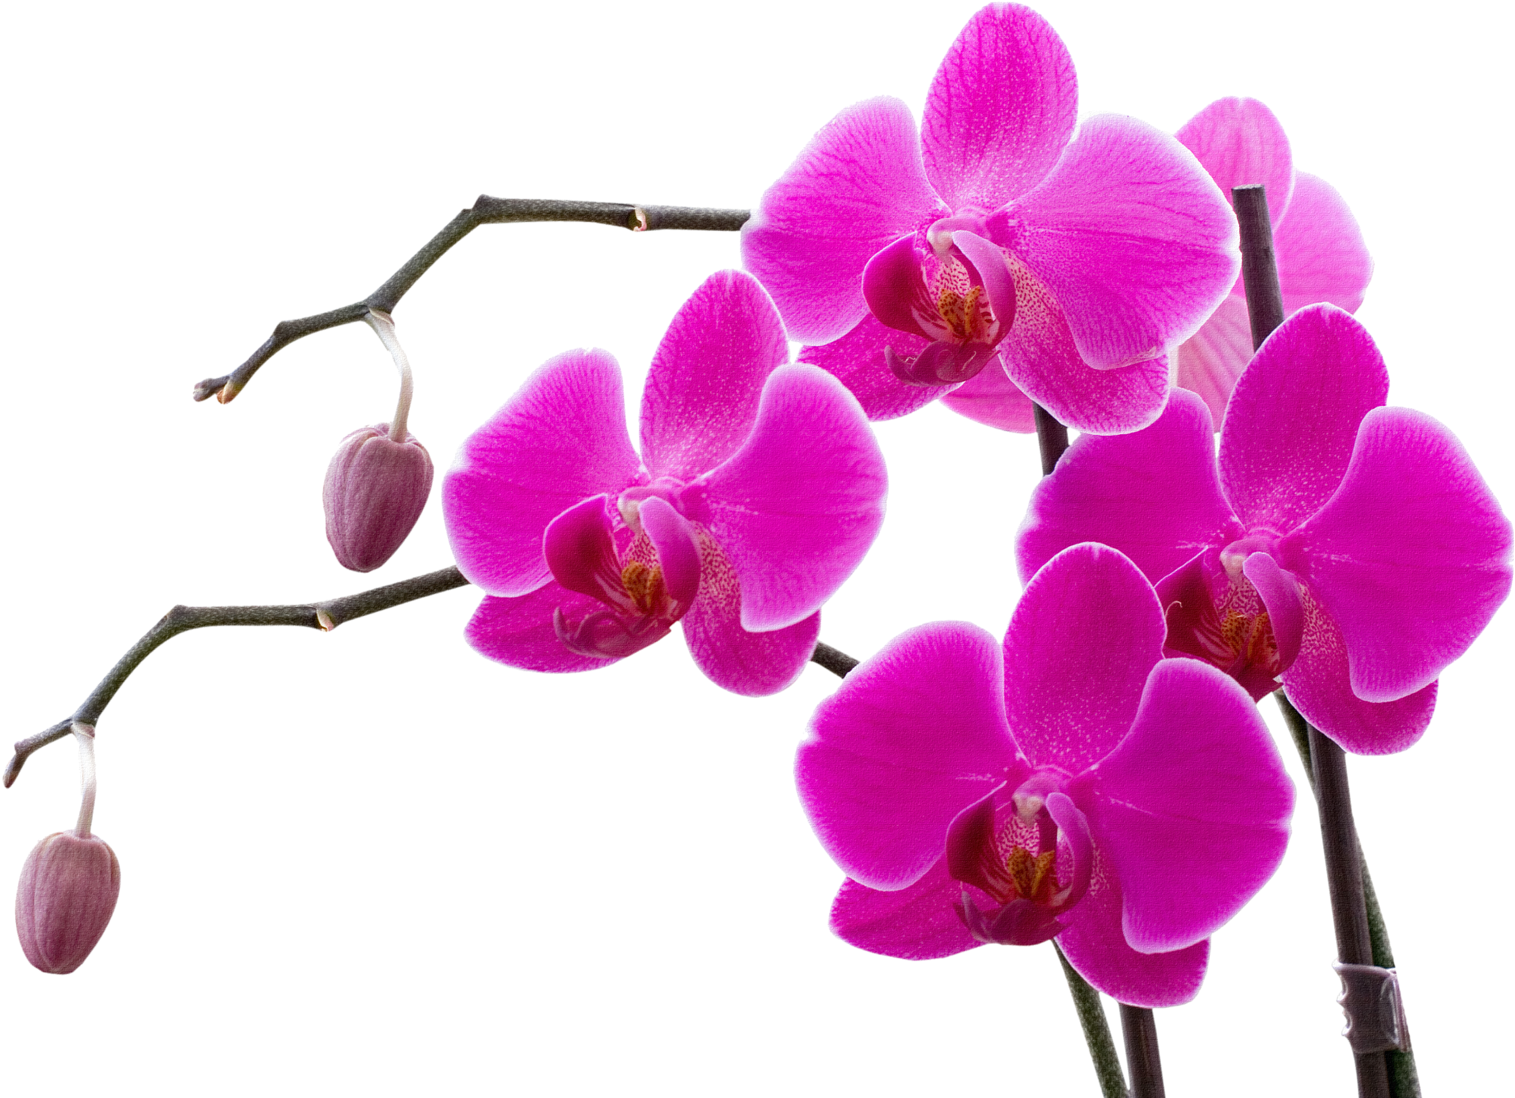 009png Orchid And Art Flowers - Orchid Flower (1600x1114)